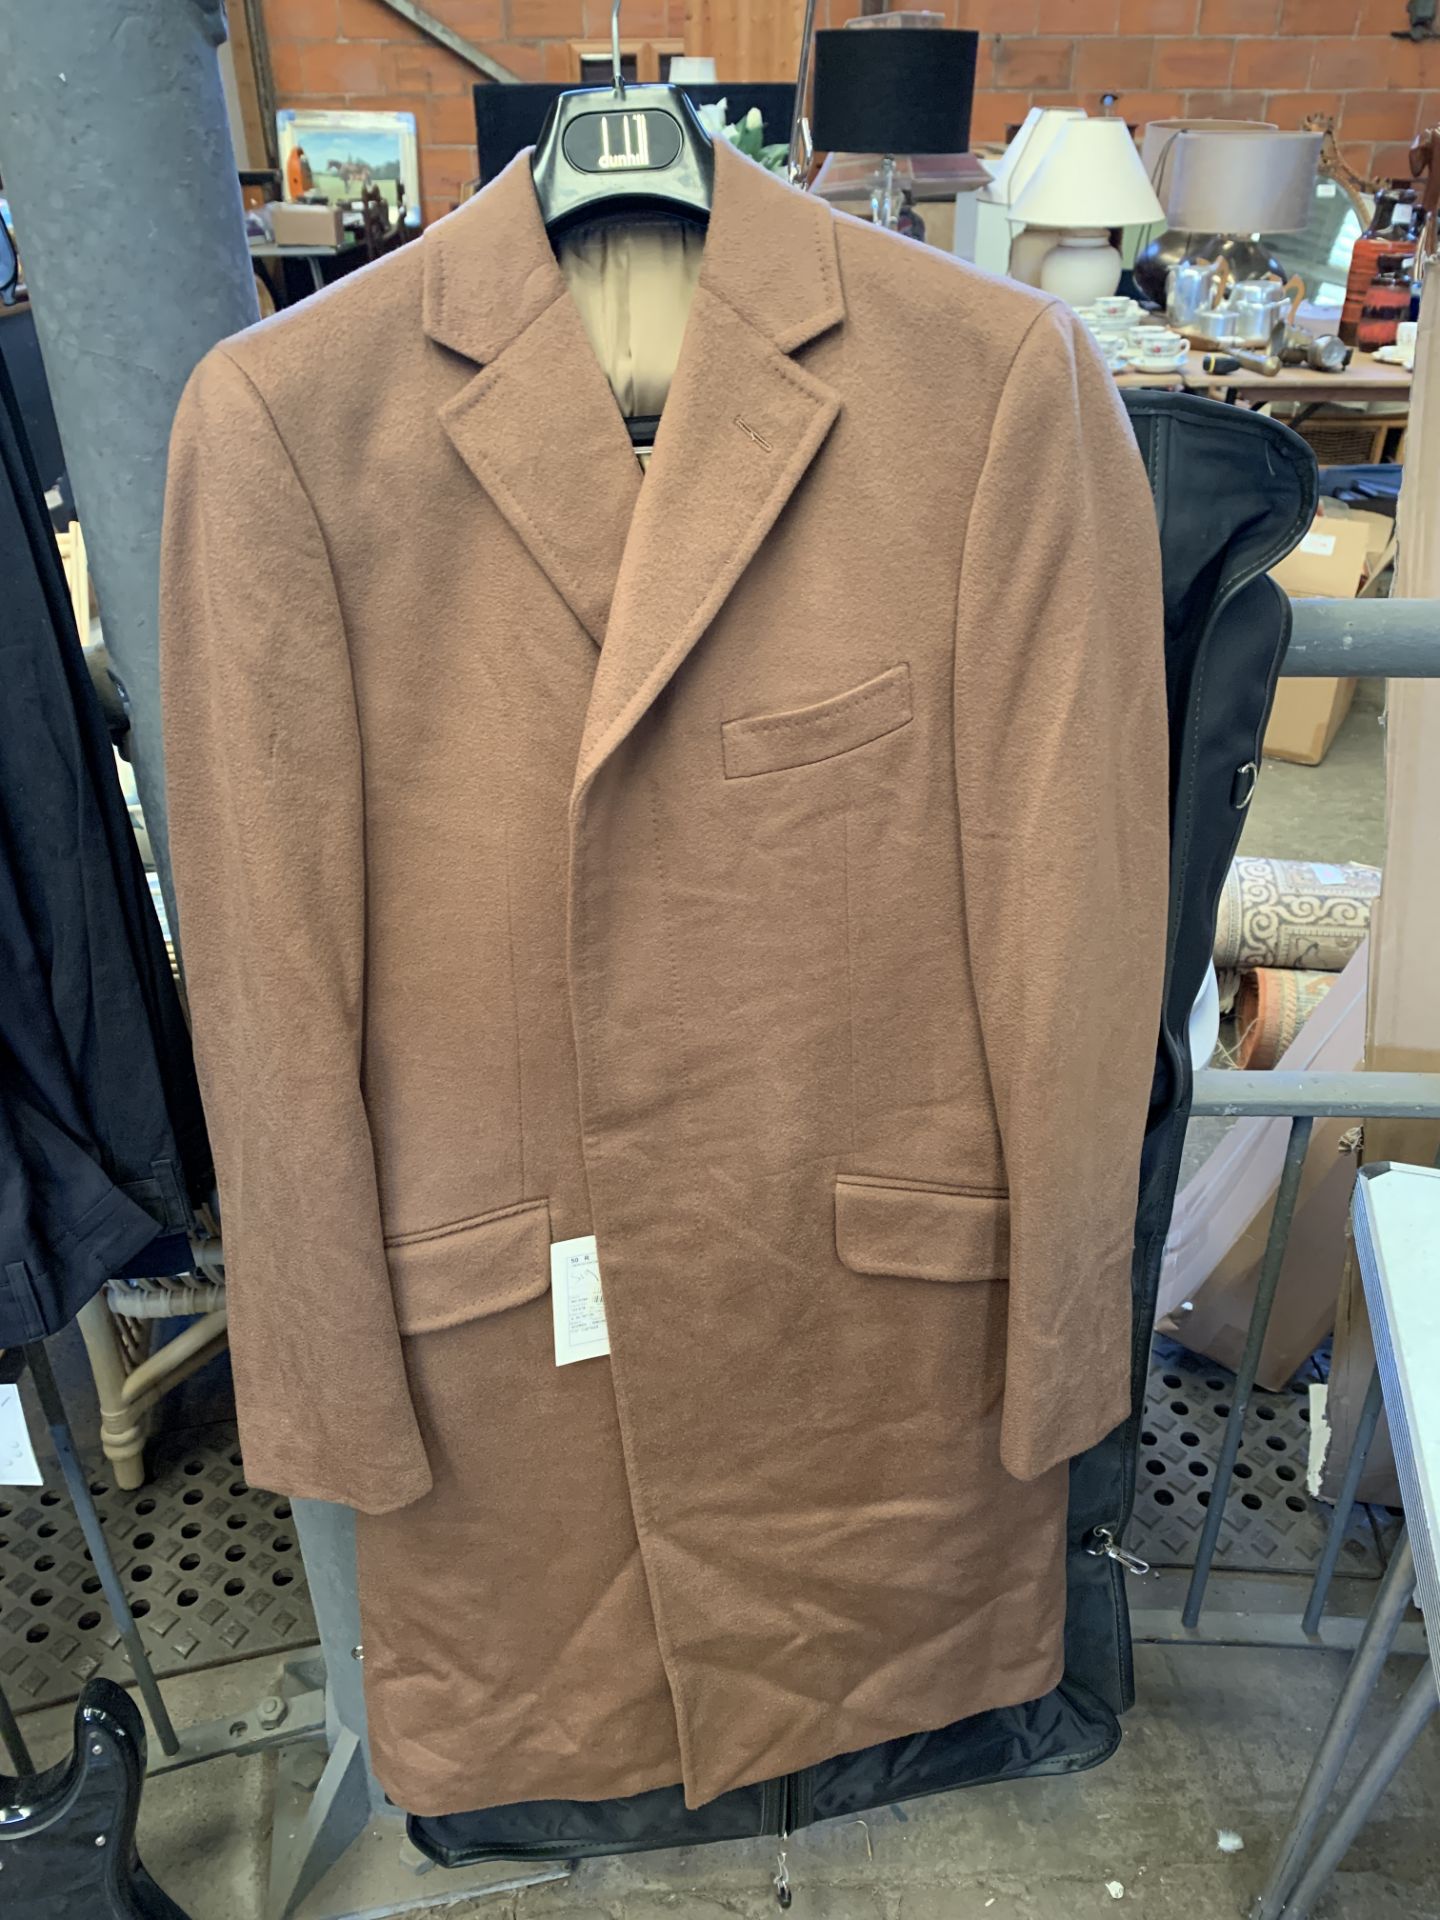 Dunhill 100% cashmere camel coloured coat, and 5 pairs of Dunhill trousers